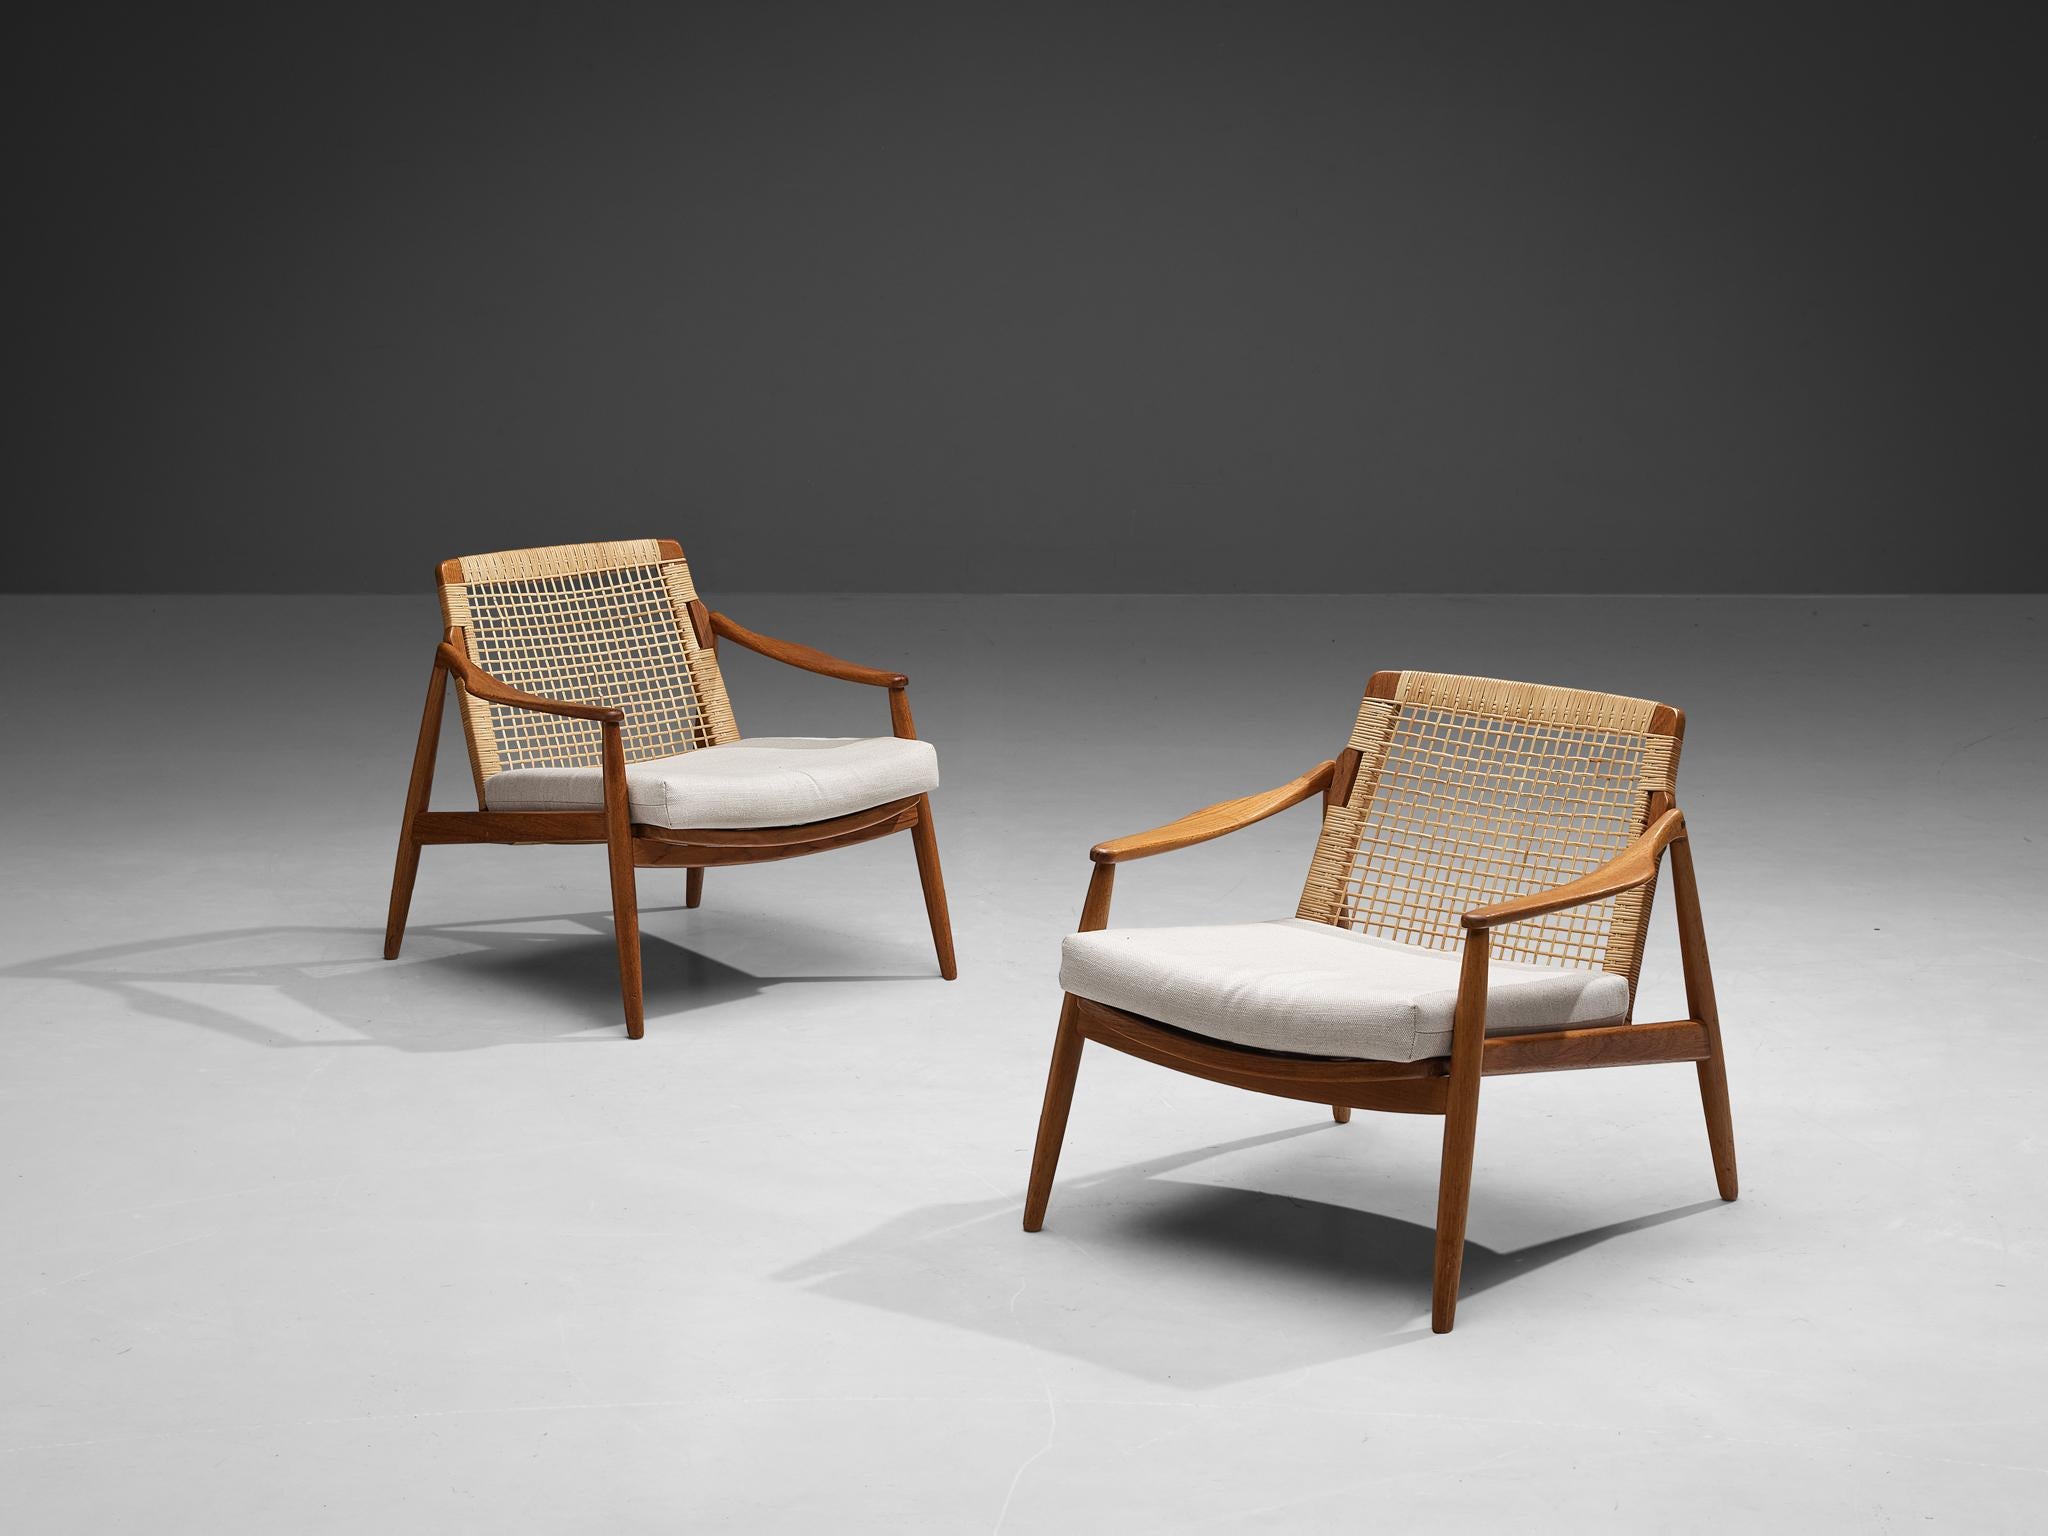 Hartmut Lohmeyer for Wilkhahn, armchairs, whitefabric, teak and rattan, Germany, 1956.

This pair of lounge low armchairs is sensuous and organically shaped. It features a slightly tilted back and is detailed with tapered legs. The softly bent